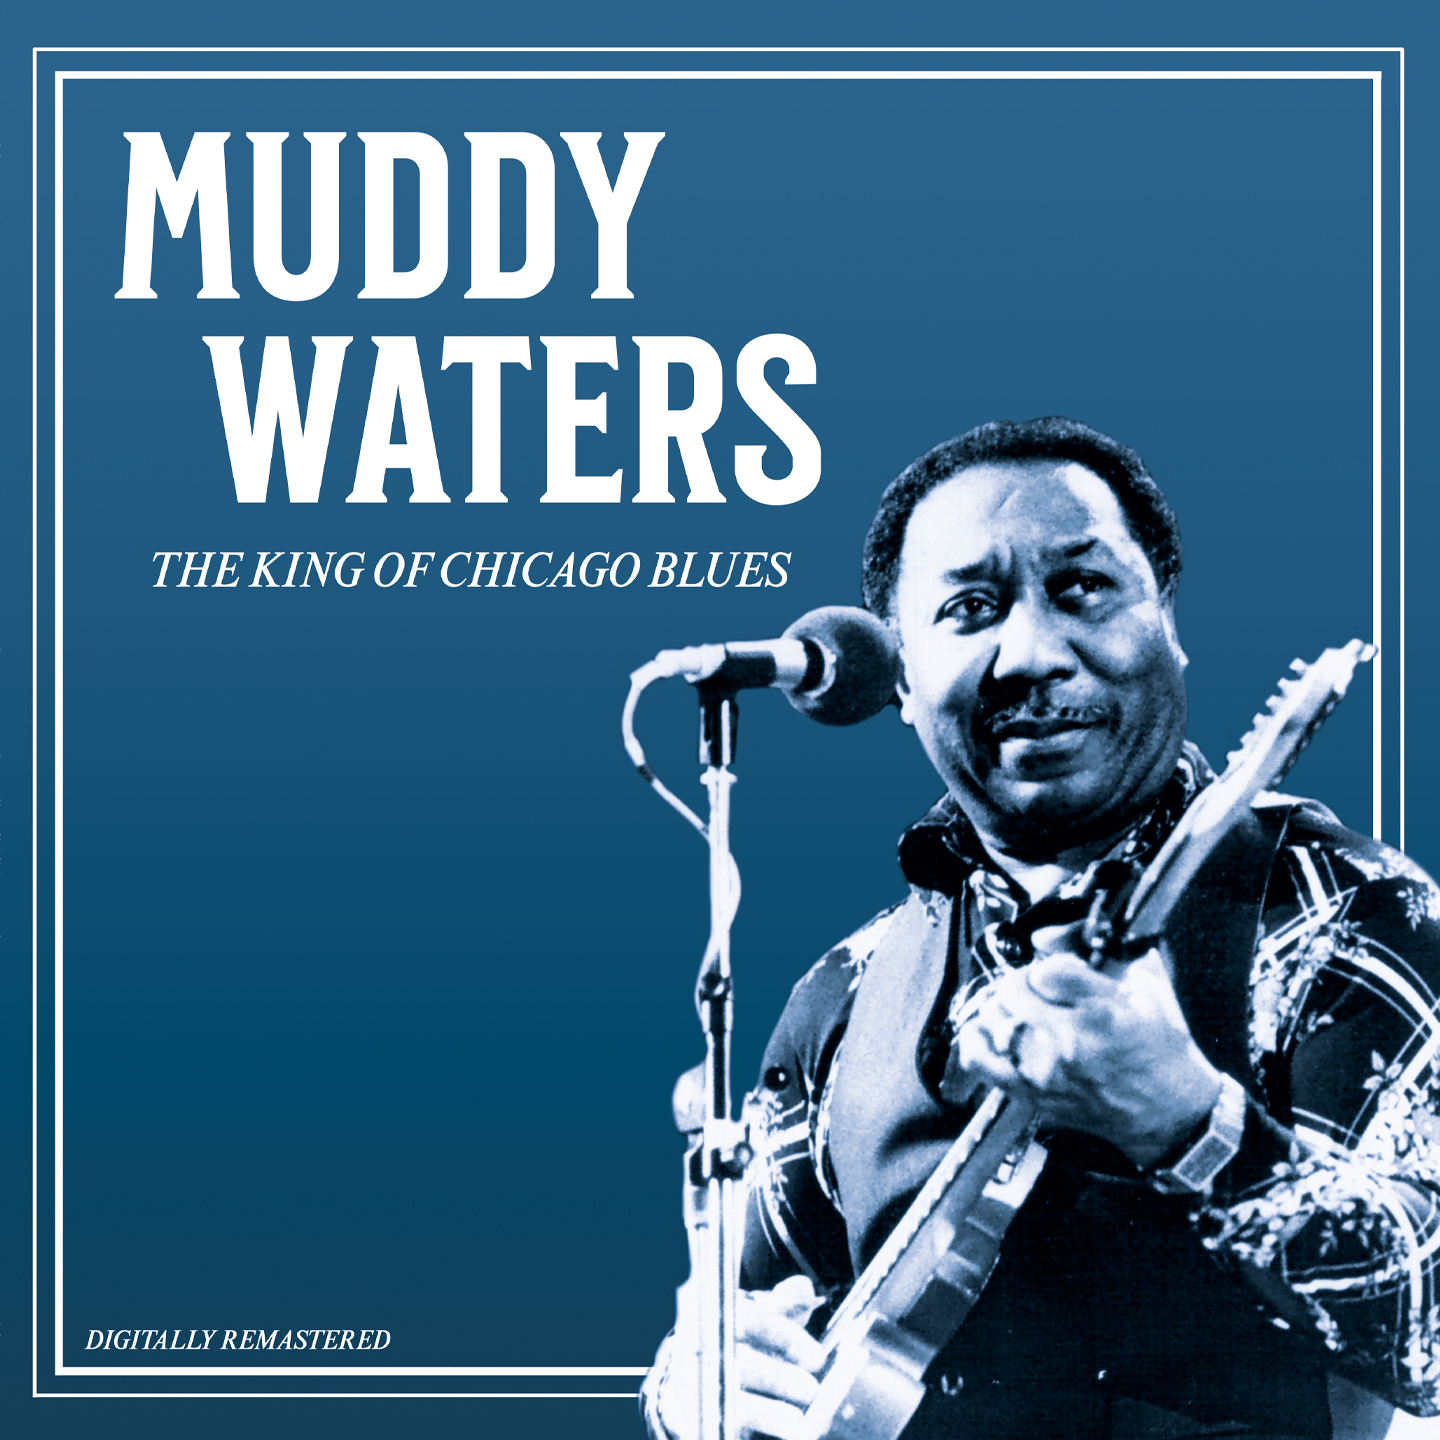 Muddy Waters - The King of Chicago Blues